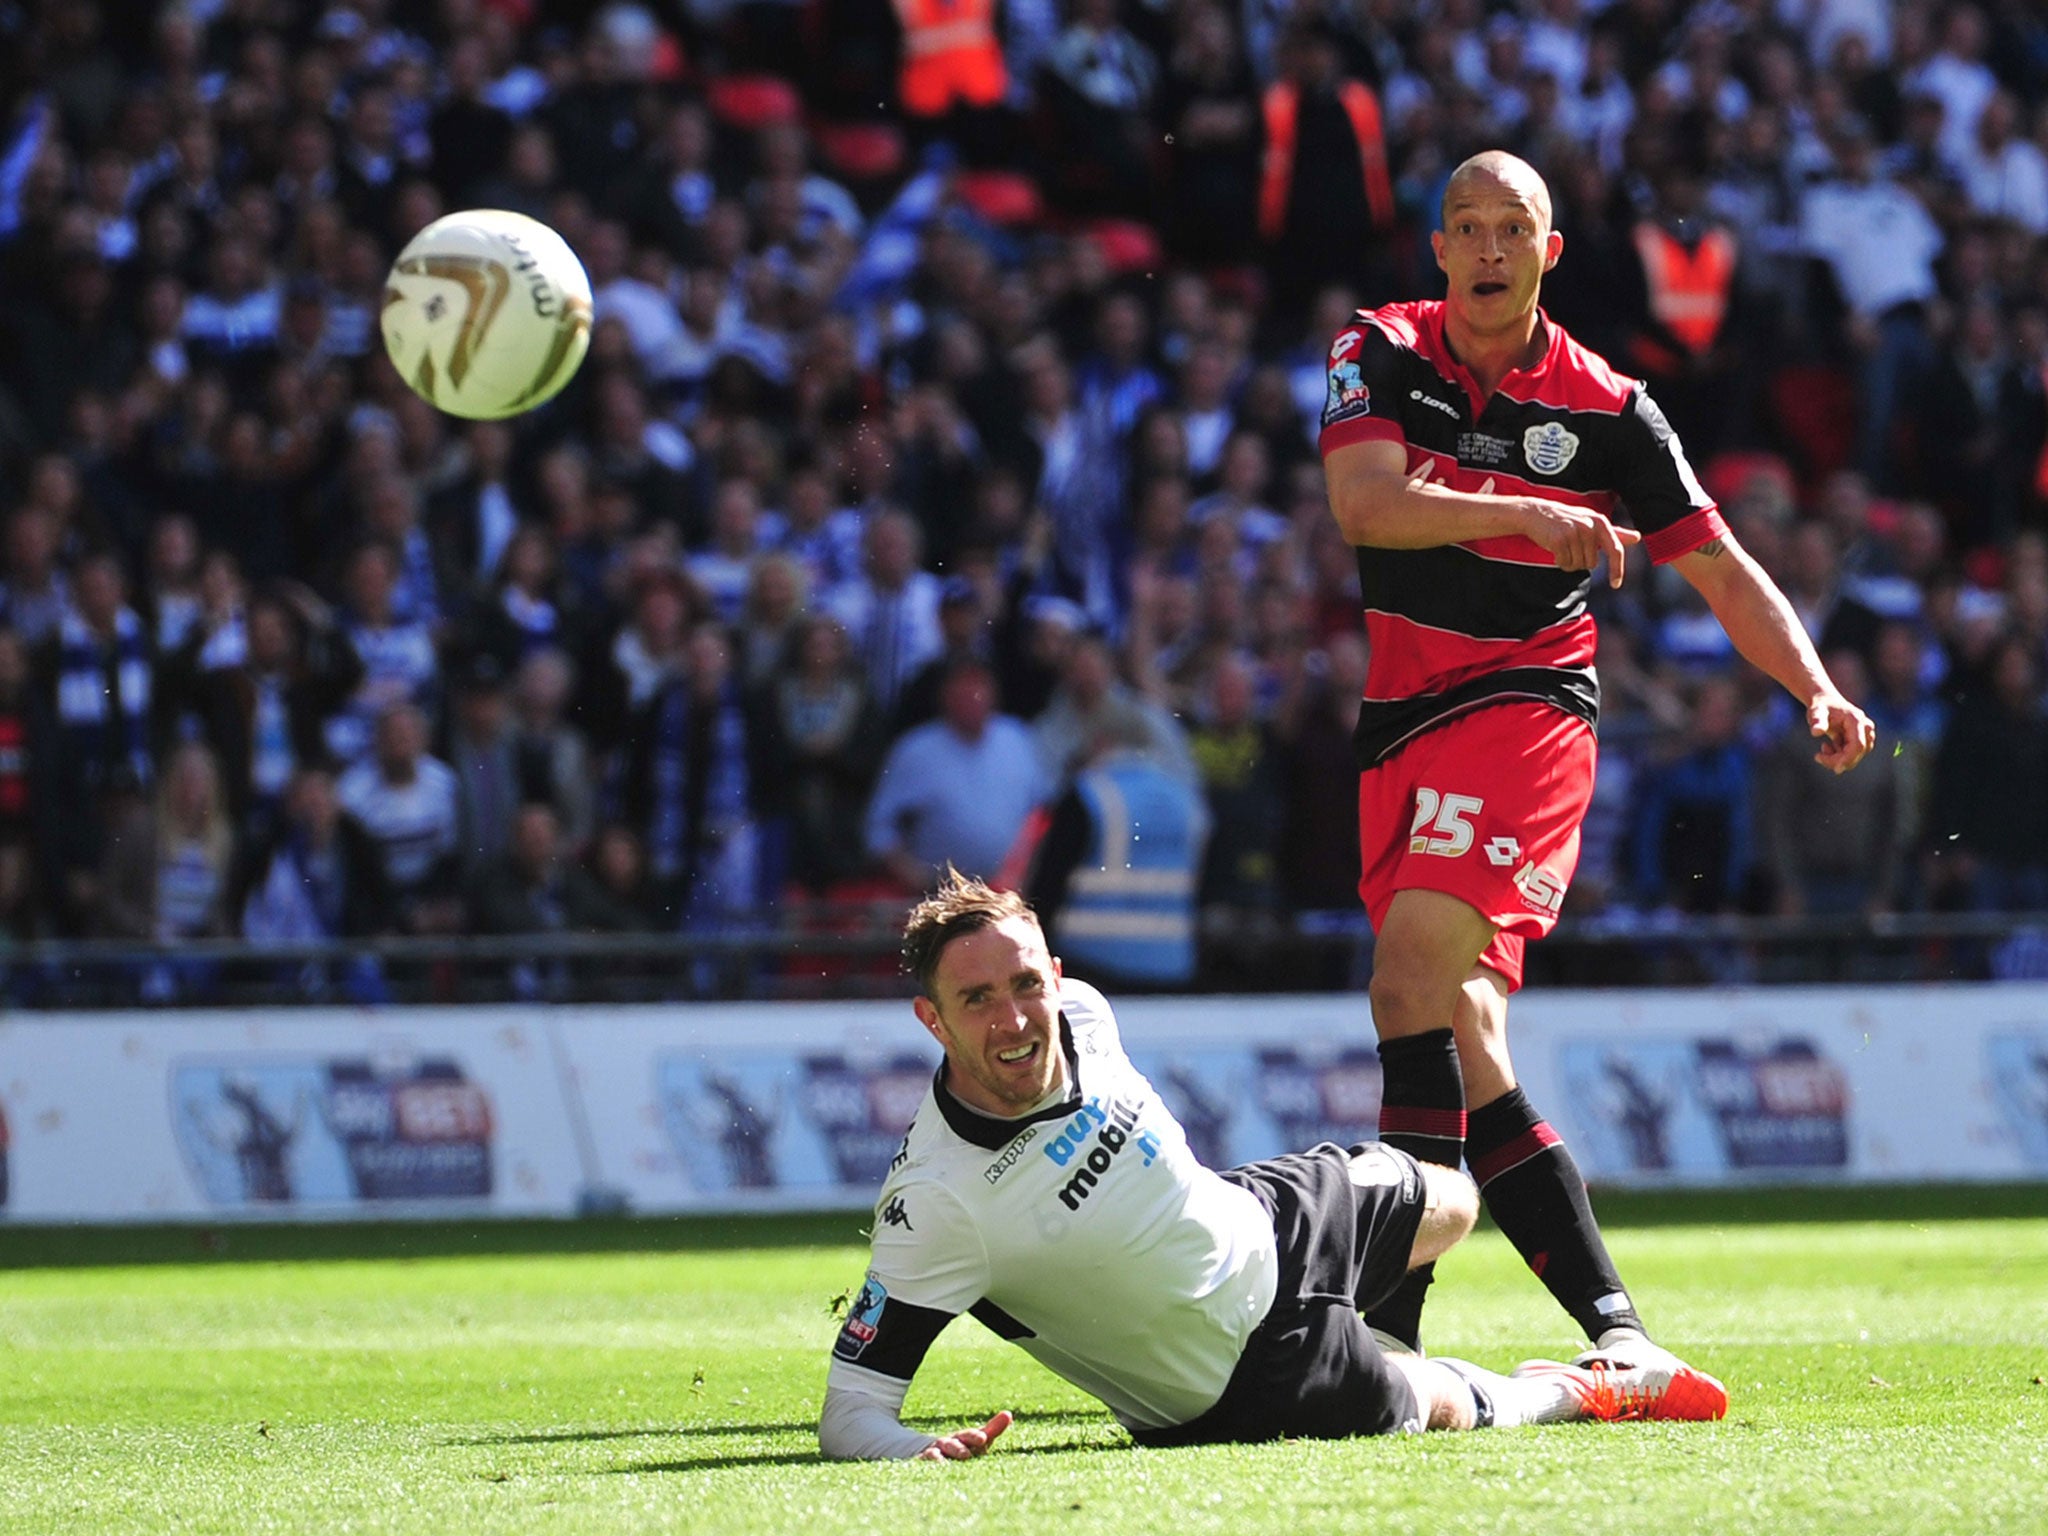 Bobby Zamora scores in the last minute to send QPR up